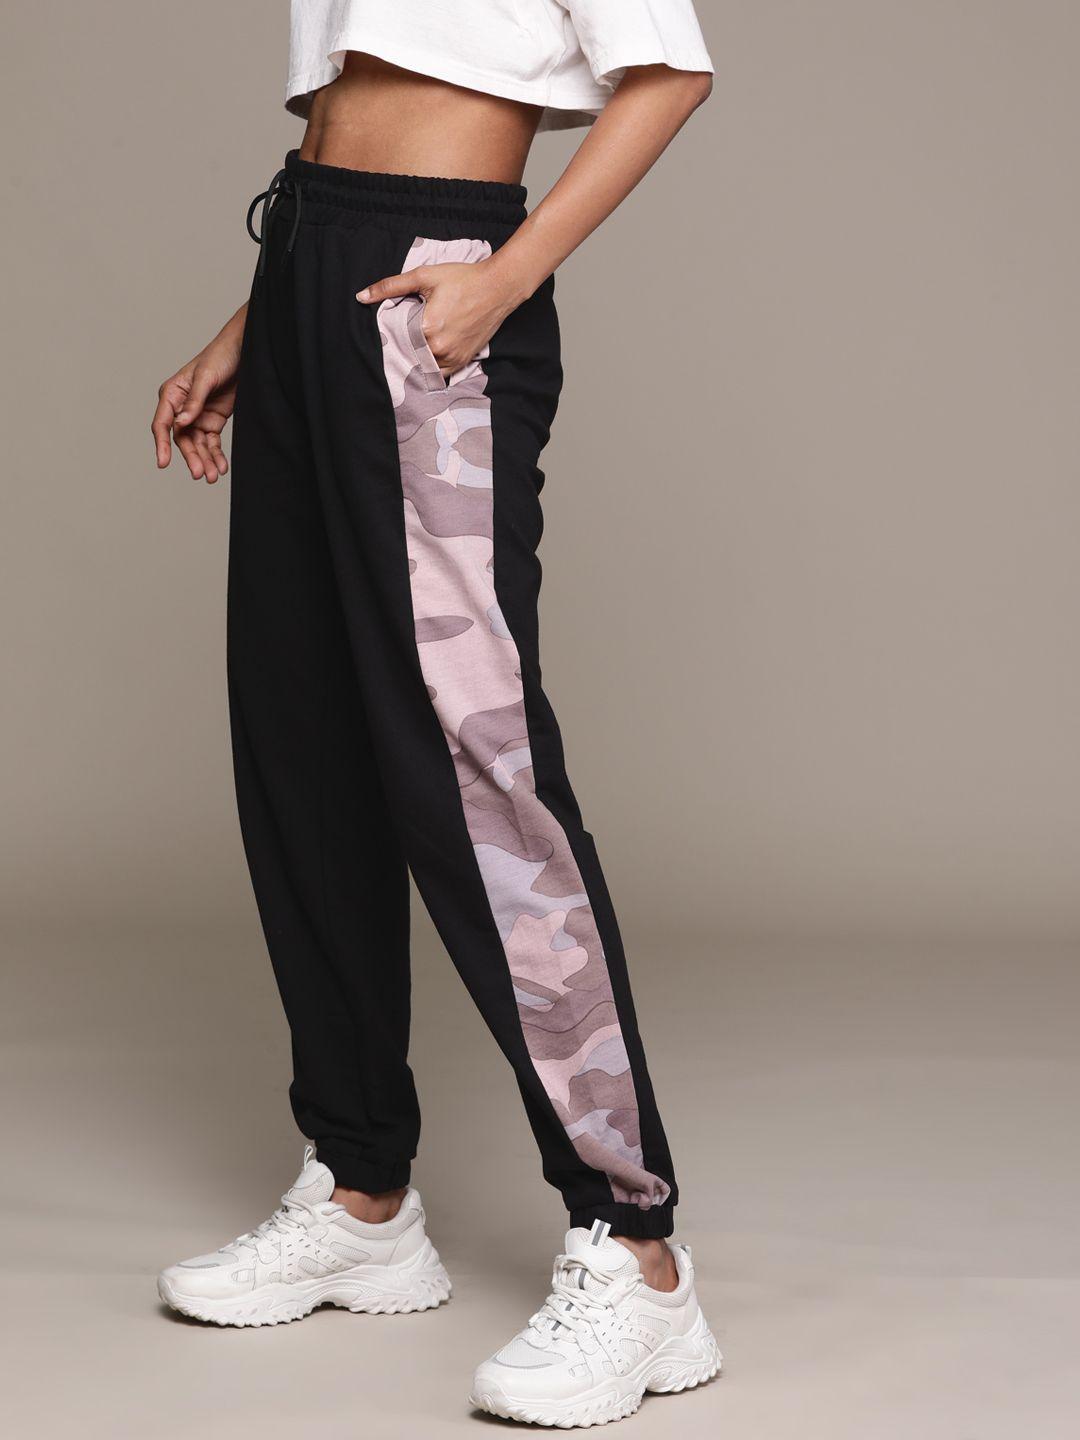 The Roadster Lifestyle Co. Camo Print Tapered Trackpants